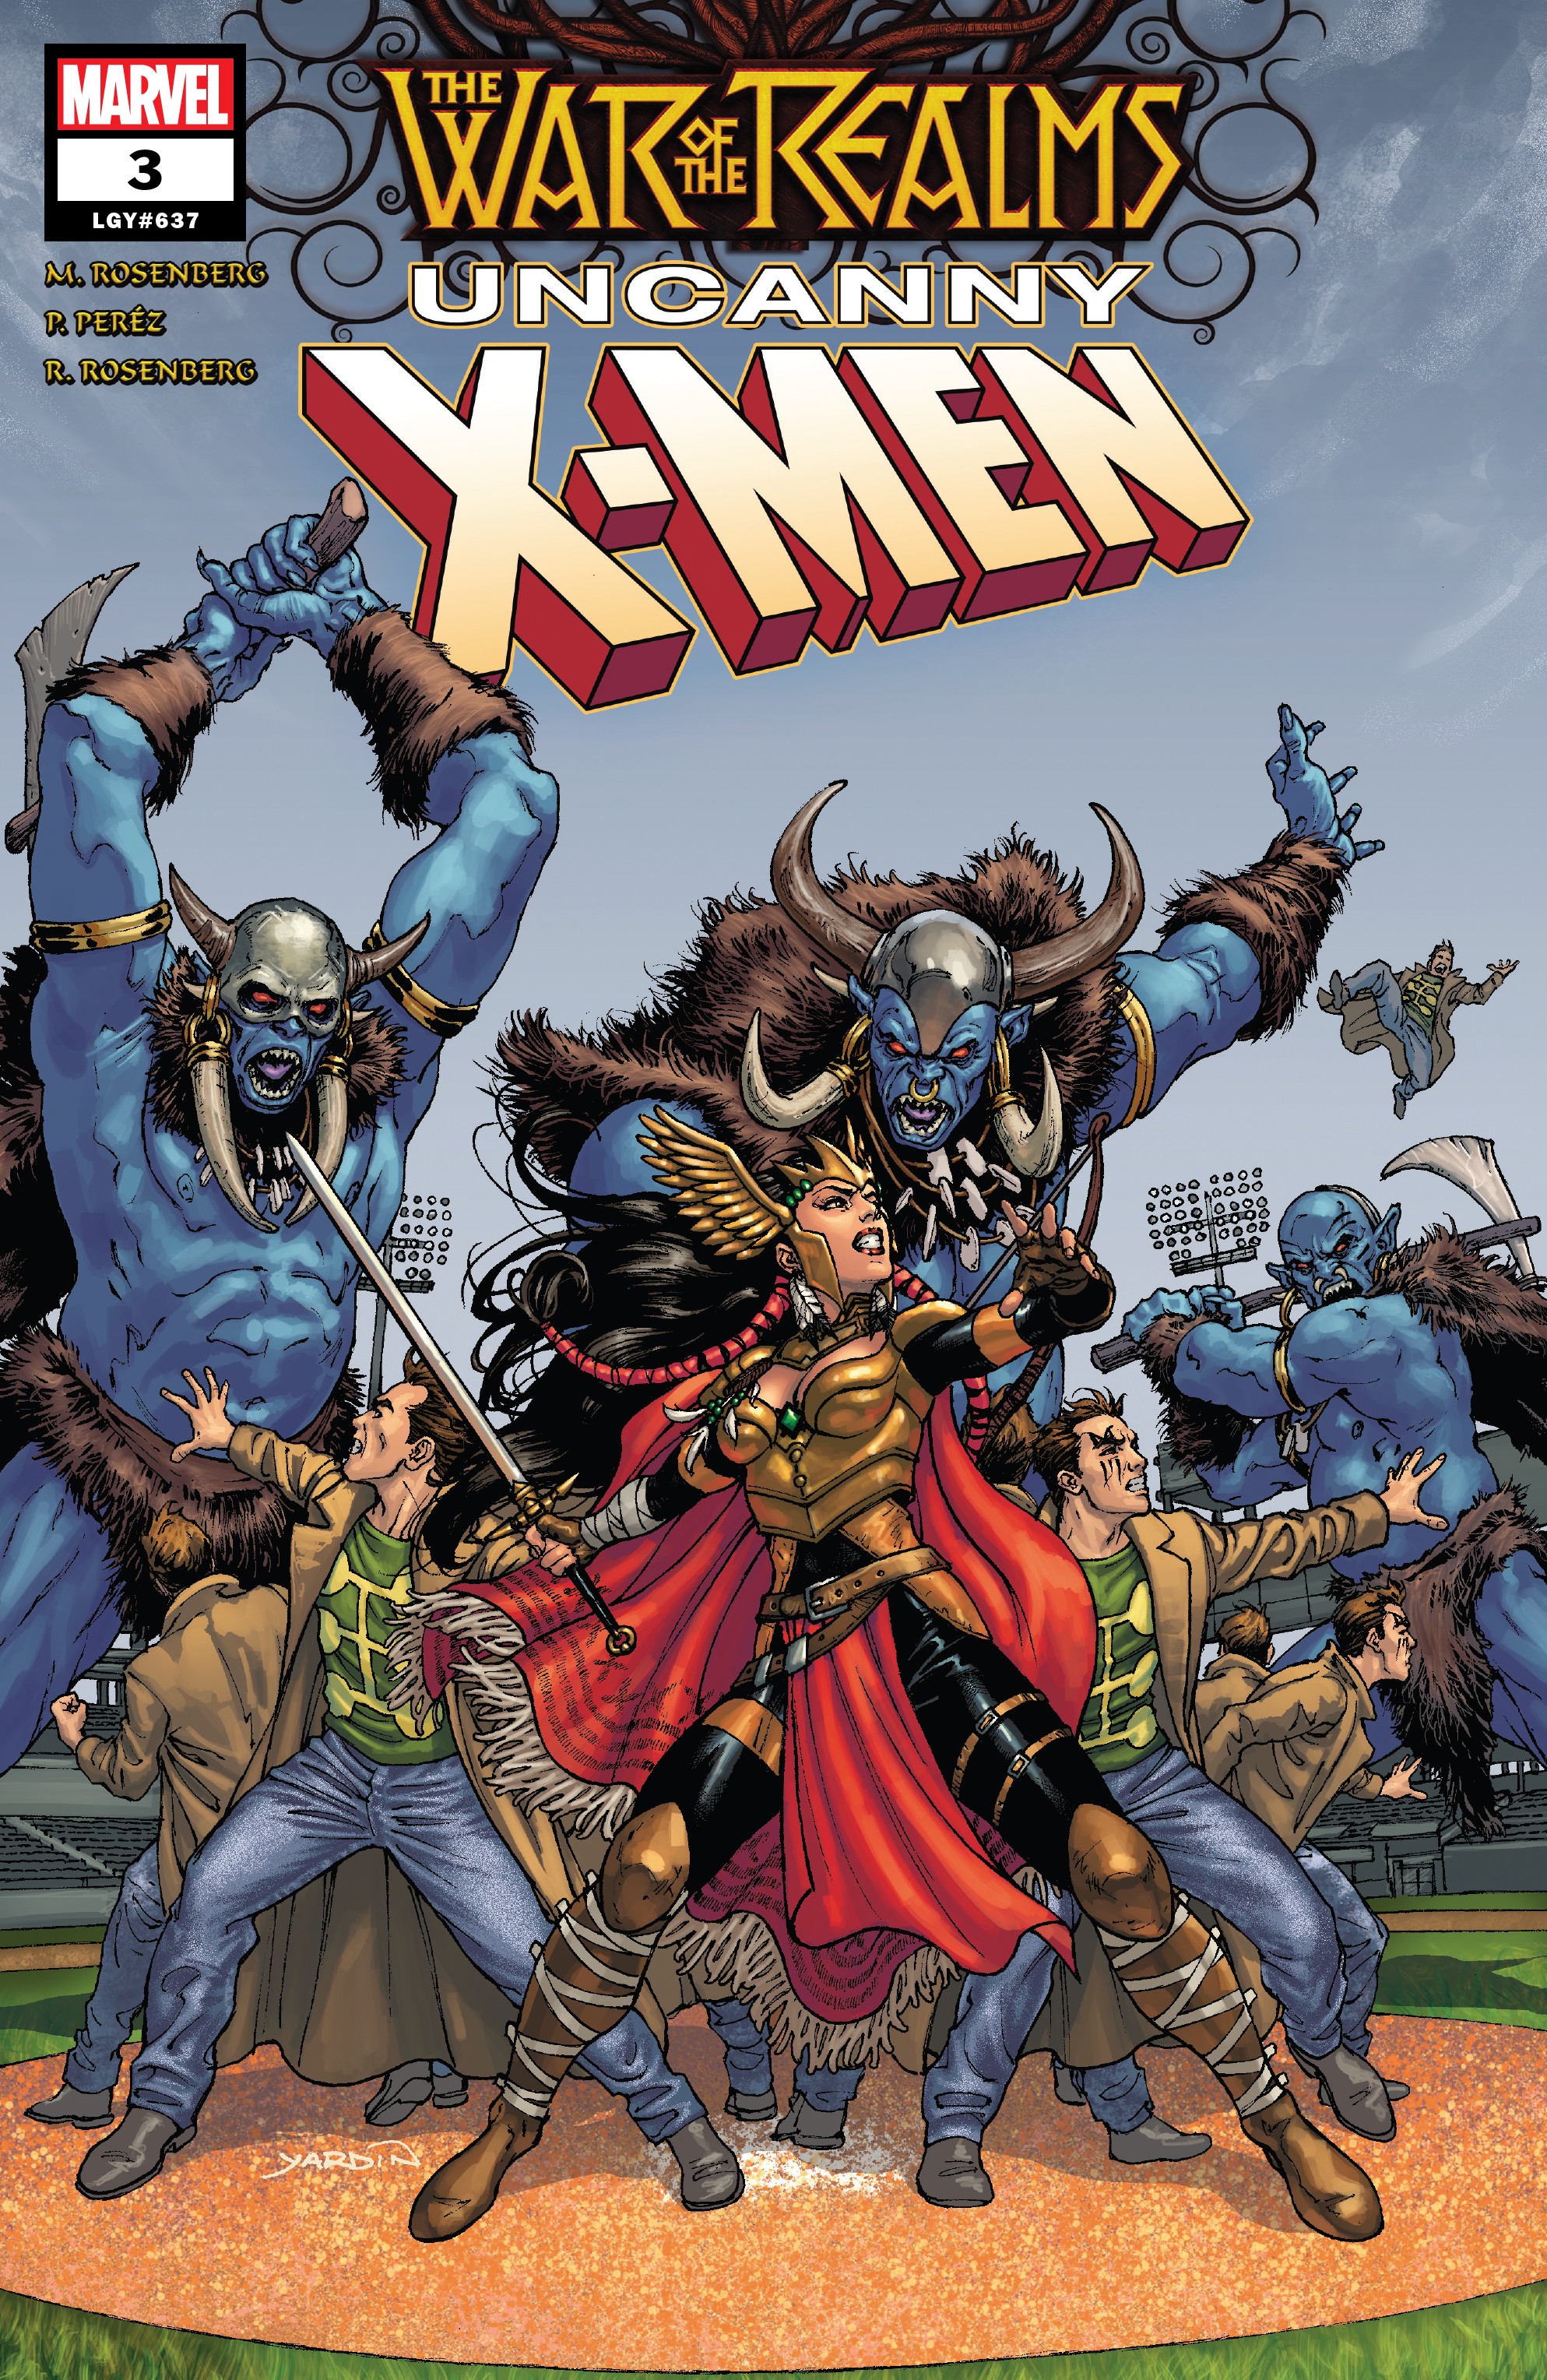 Read online War of the Realms: Uncanny X-Men comic -  Issue #3 - 1